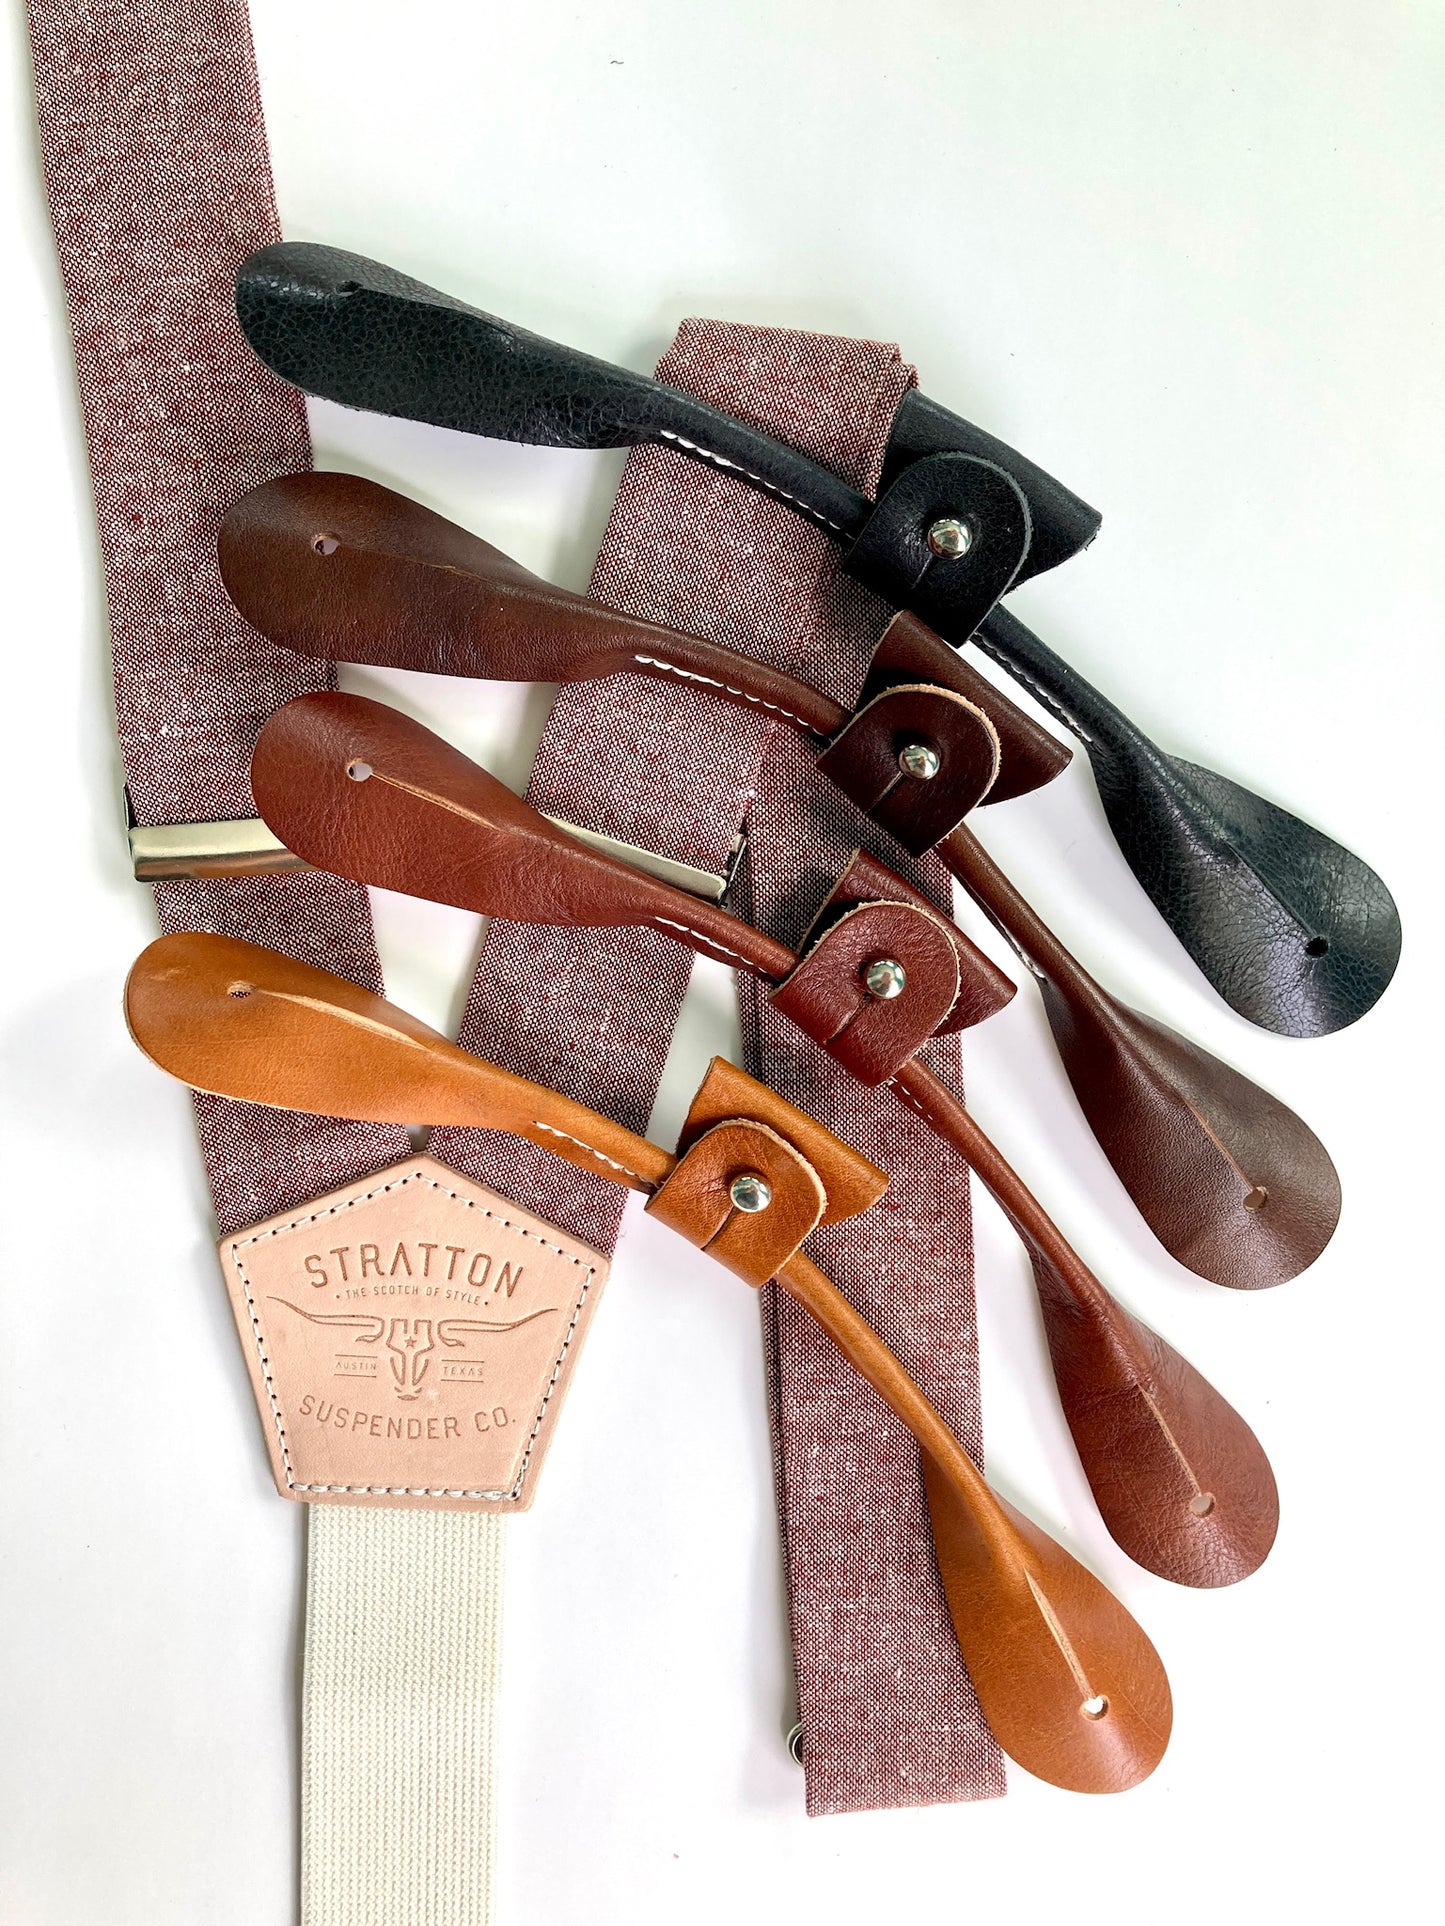 Maroon Linen Stratton Suspender Co. Set with one button on attachment in the following colors from top to bottom: Black, Chocolate (dark brown), Cognac (reddish brown), Tan (light brown)